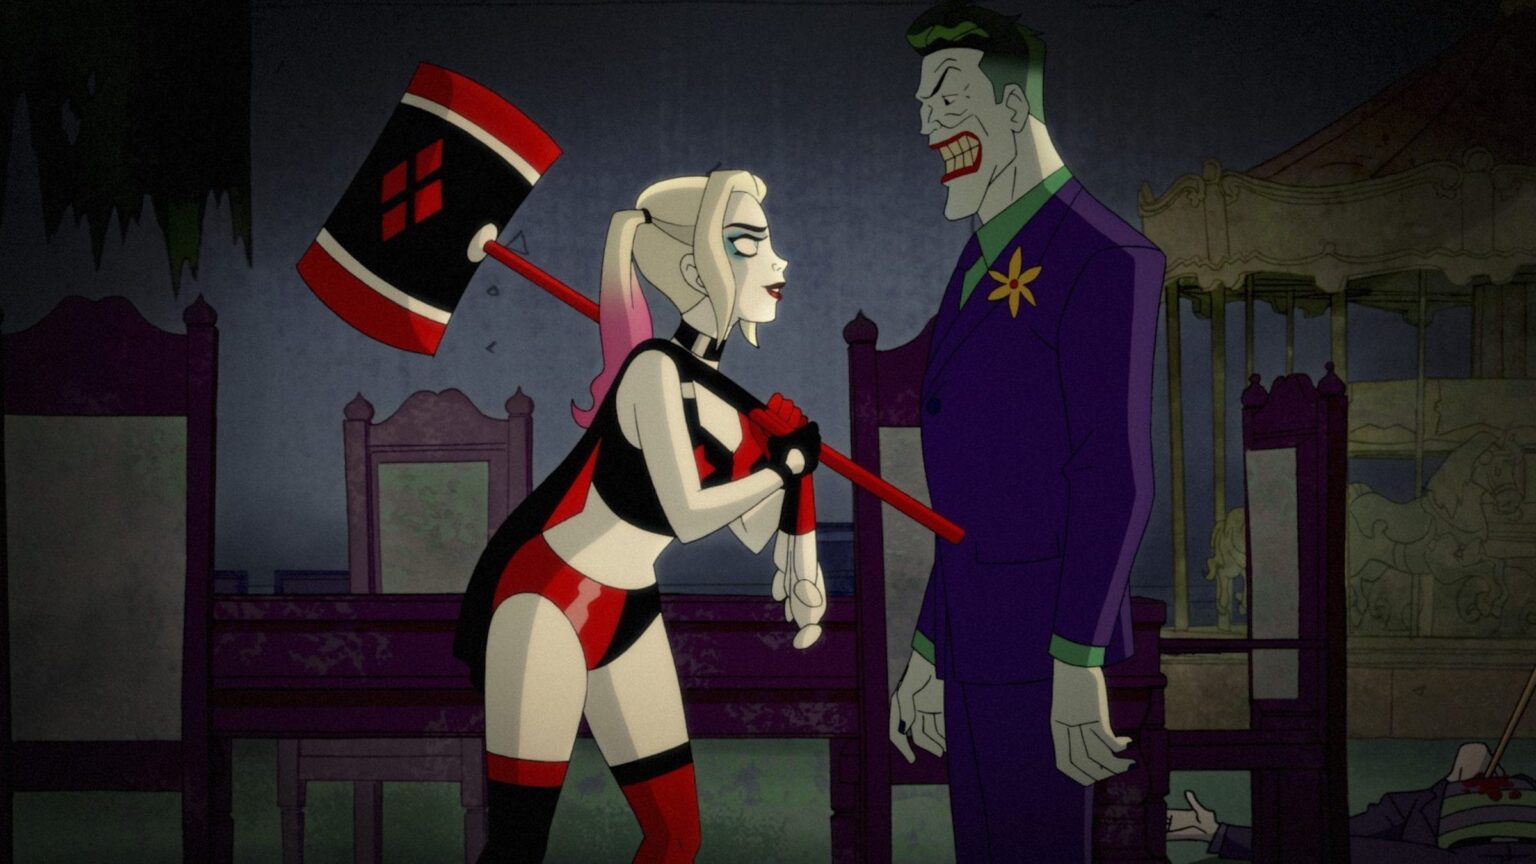 HBO Max's 'Harley Quinn' series is finally returning! Find out when you can watch the new season and what to expect in the adventures of Harley & Ivy.